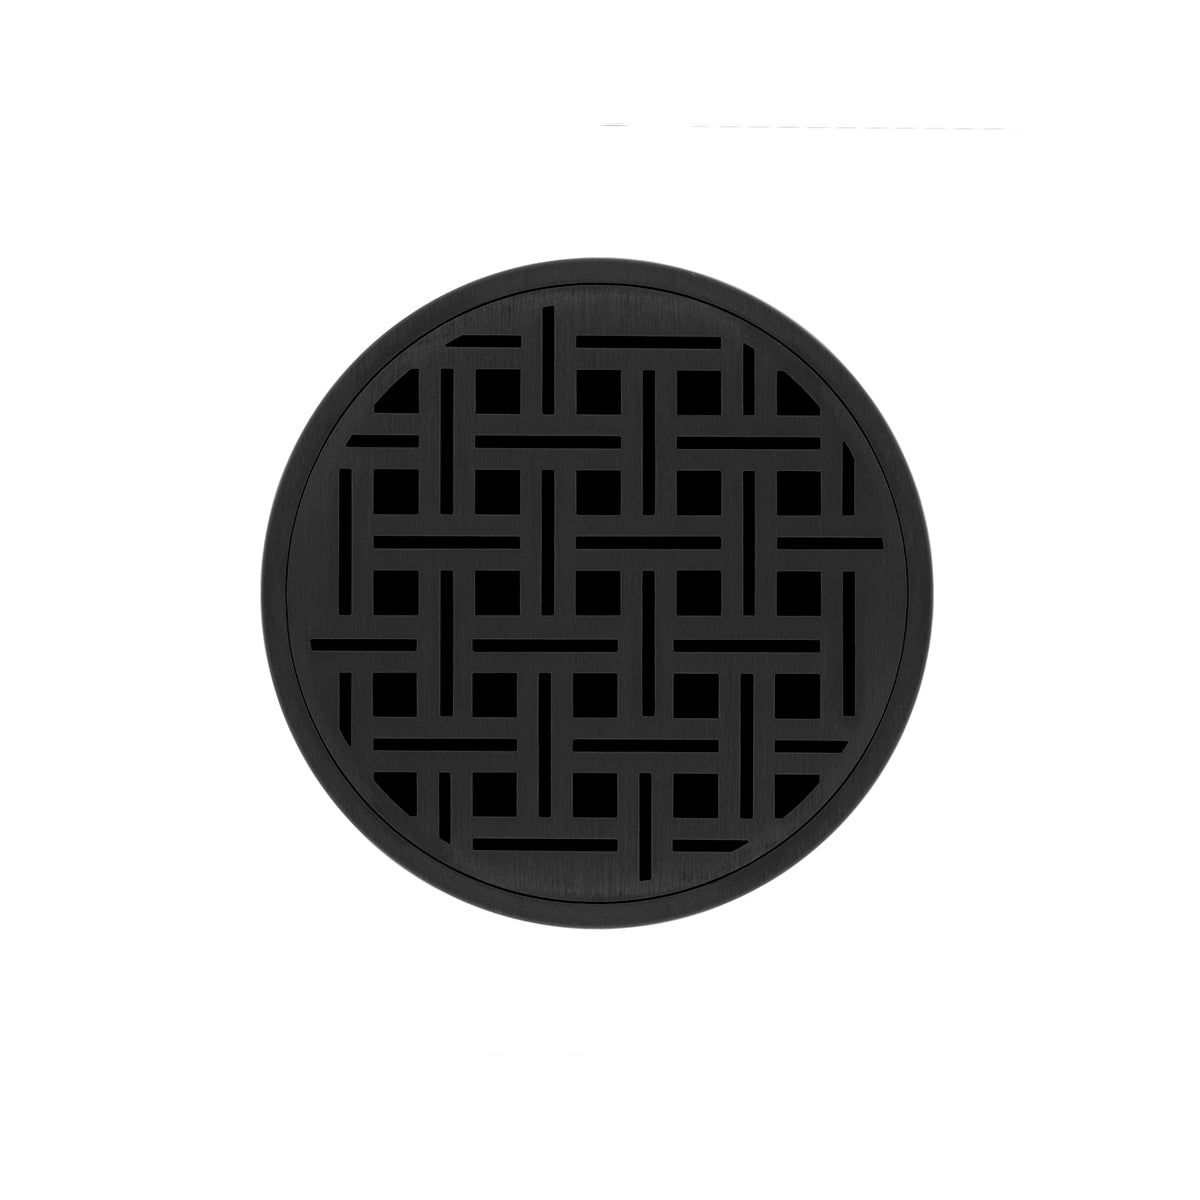 Infinity Drain 5" Round RVD 5 Premium Center Drain Kit with Weave Pattern Decorative Plate with Cast Iron Drain Body, 2" Outlet